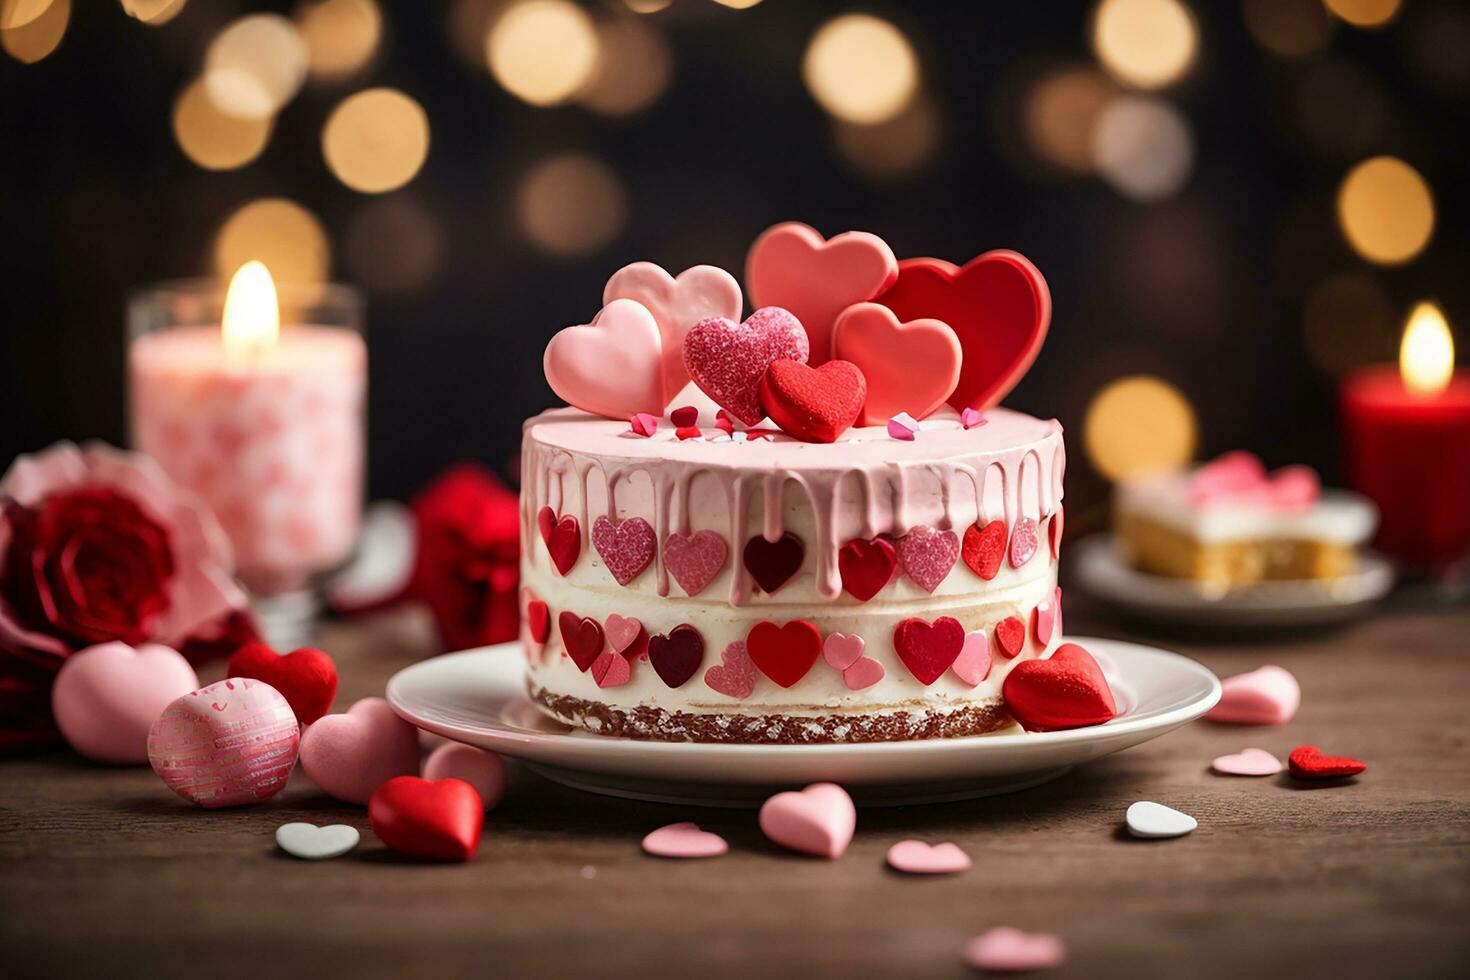 AI generated Valentine's day cake with hearts and candies on a background with bokeh photo